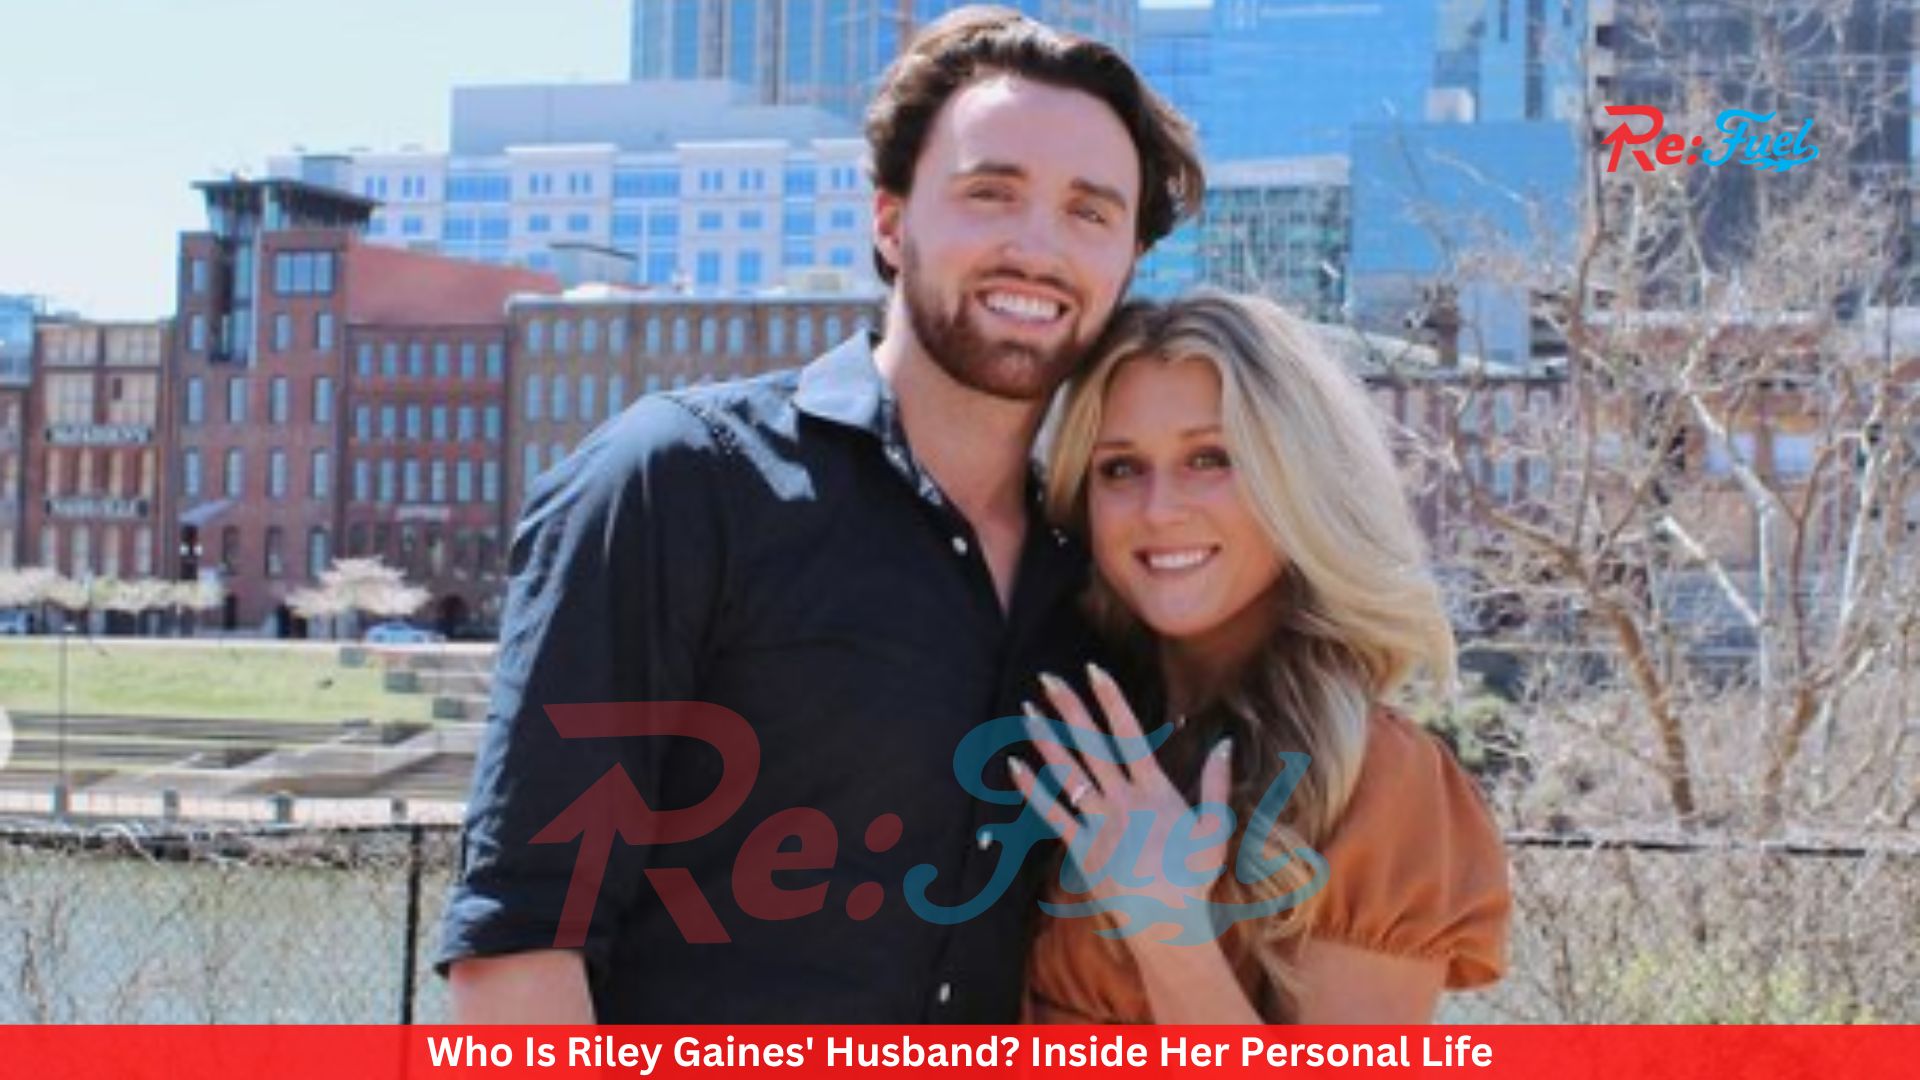 Who Is Riley Gaines' Husband? Inside Her Personal Life